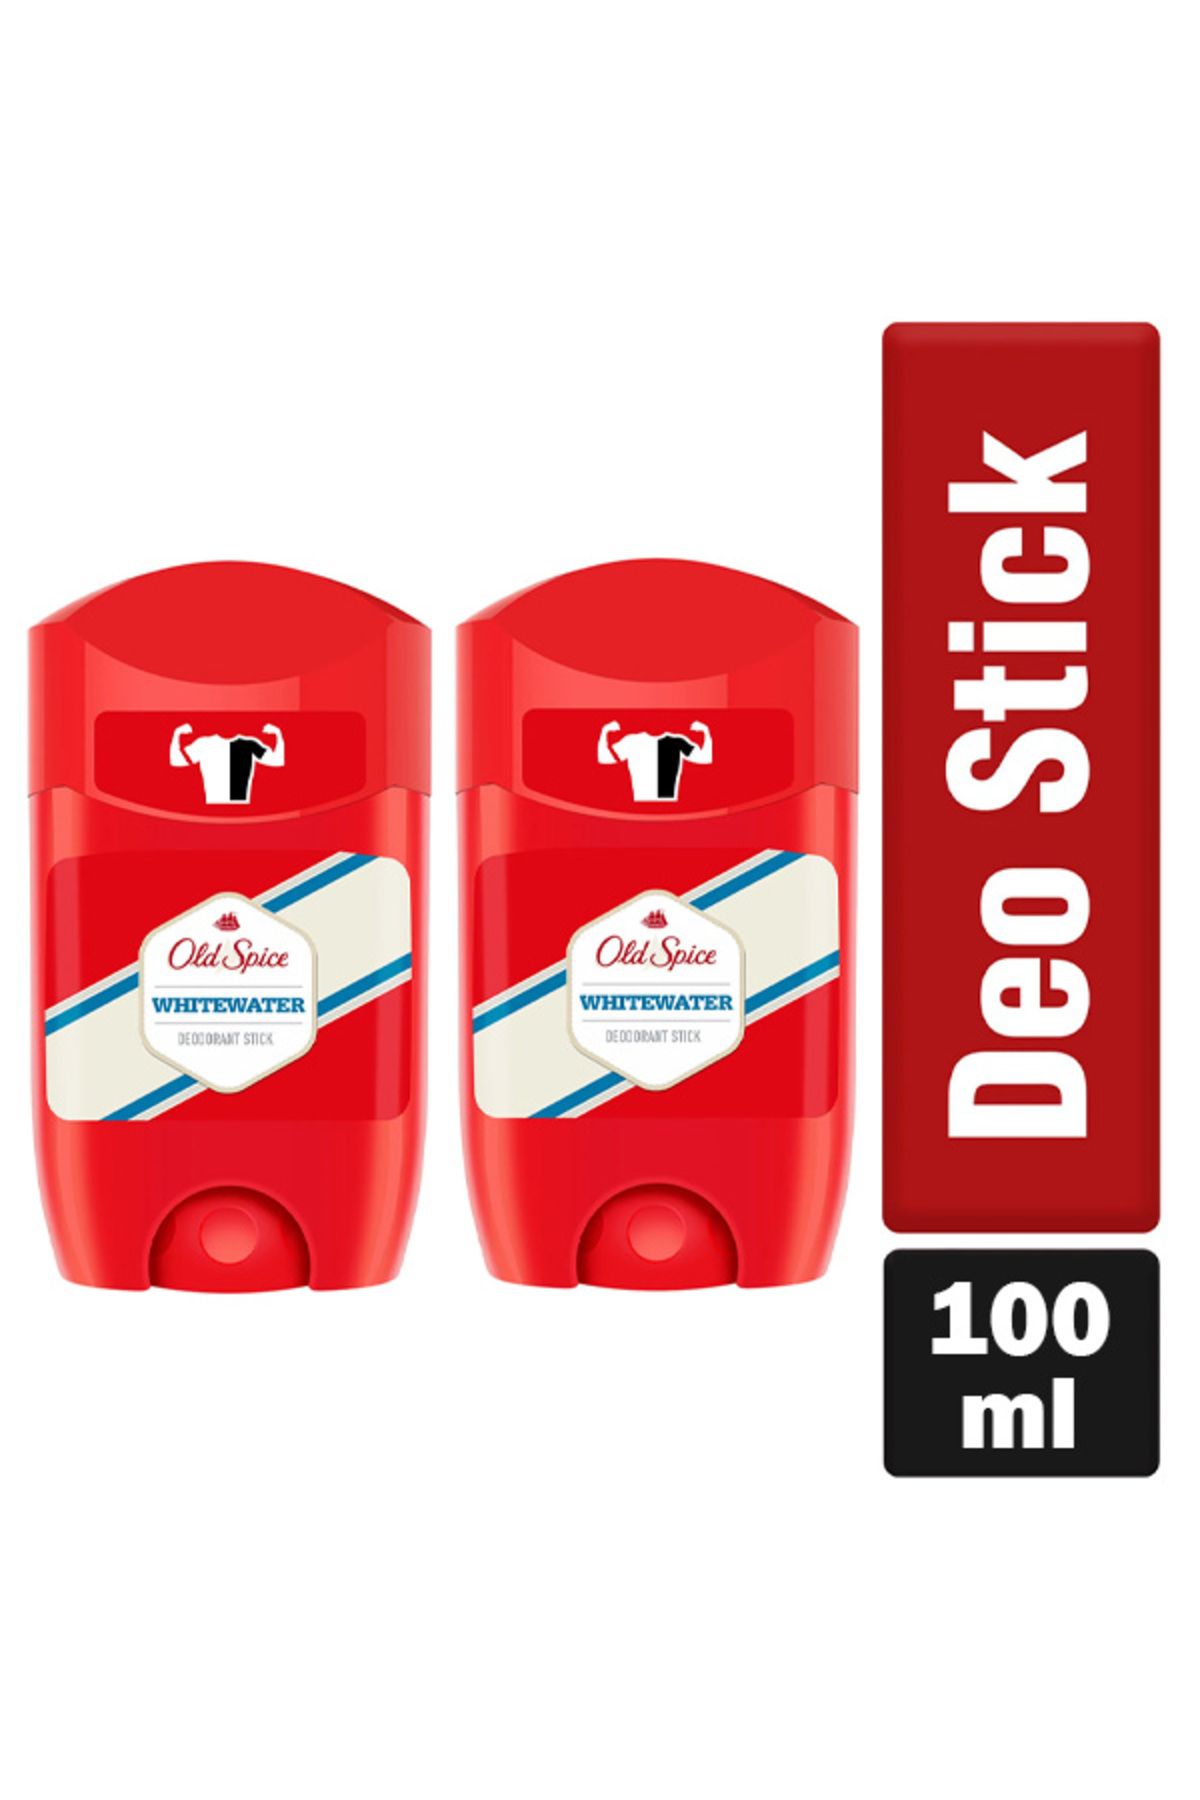 Old Spice Whitewater Deodorant Stick 50 ml x 2 Adet